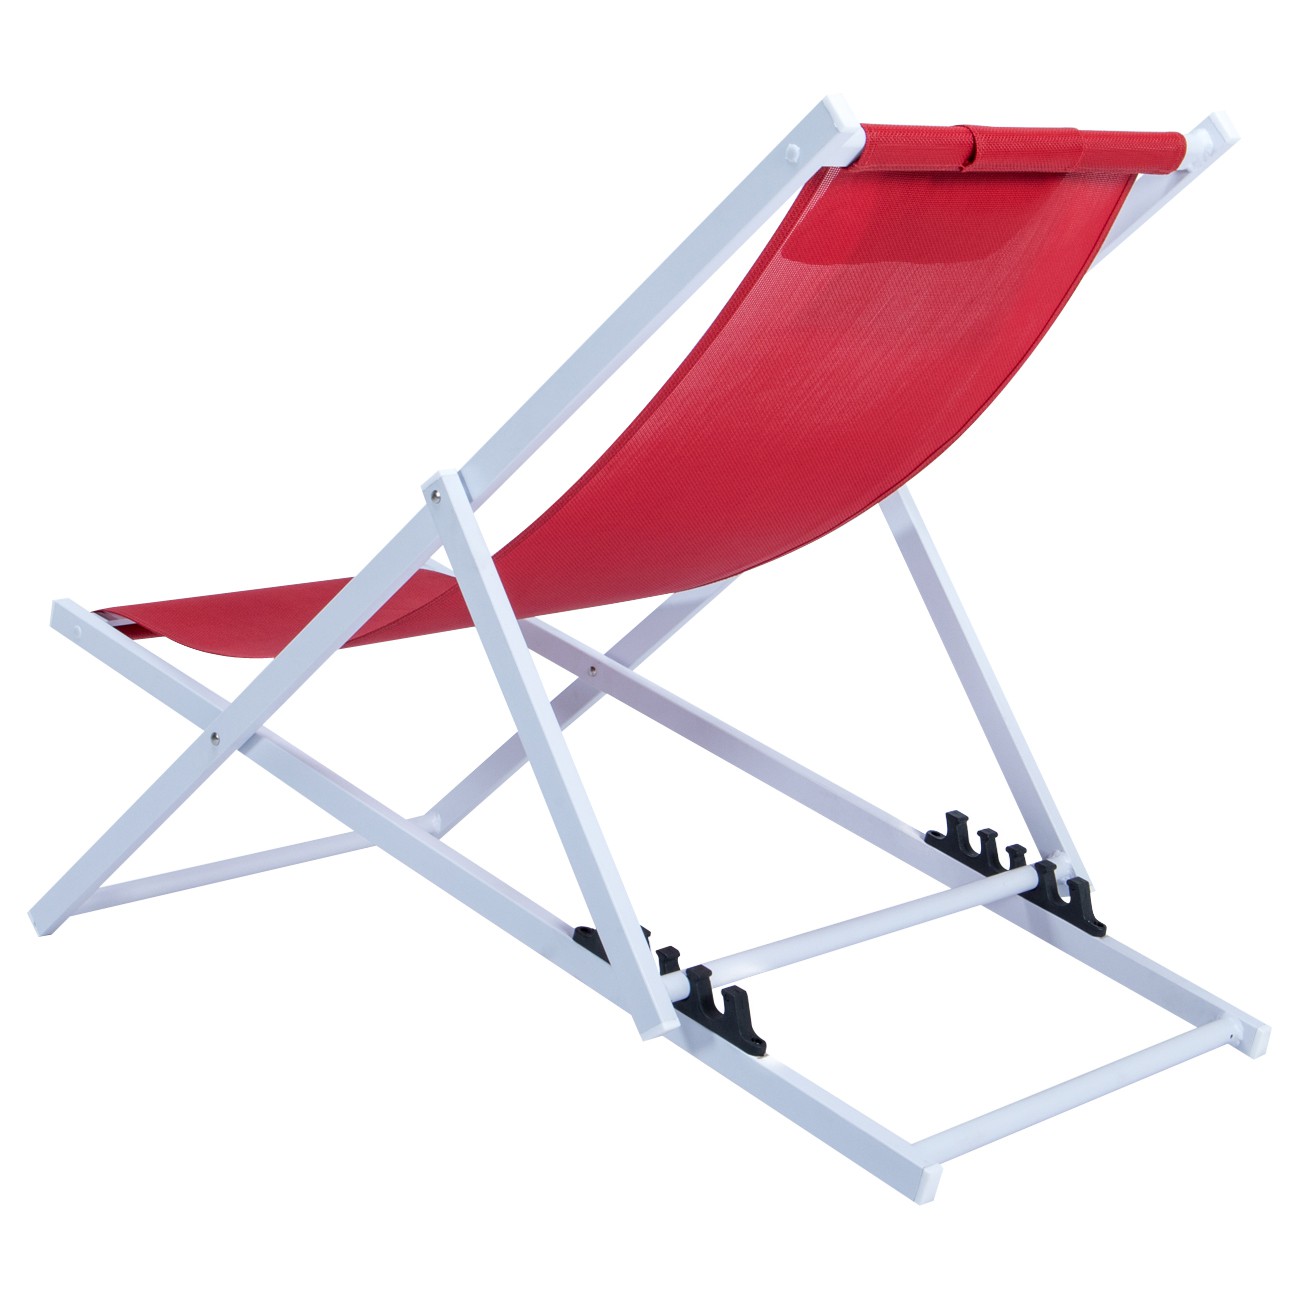 LeisureMod Sunset Outoor Sling Lounge Folding Chair With Headrest in Red - image 4 of 8